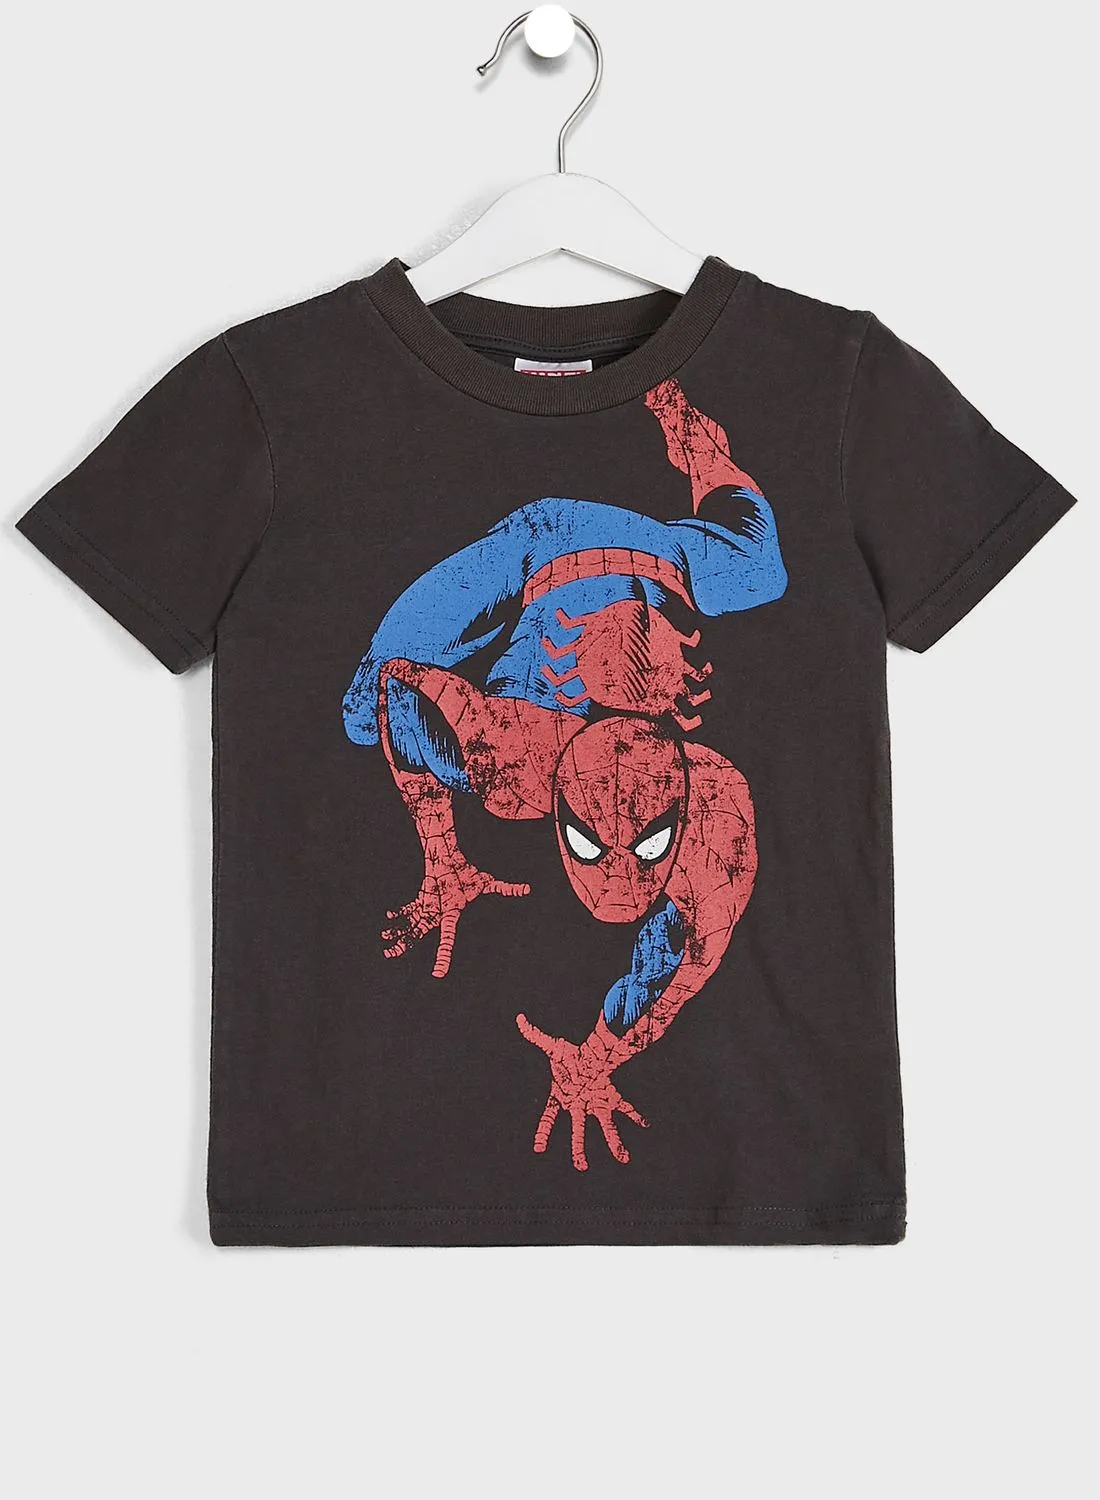 Cotton On Kids Graphic Printed T-Shirt